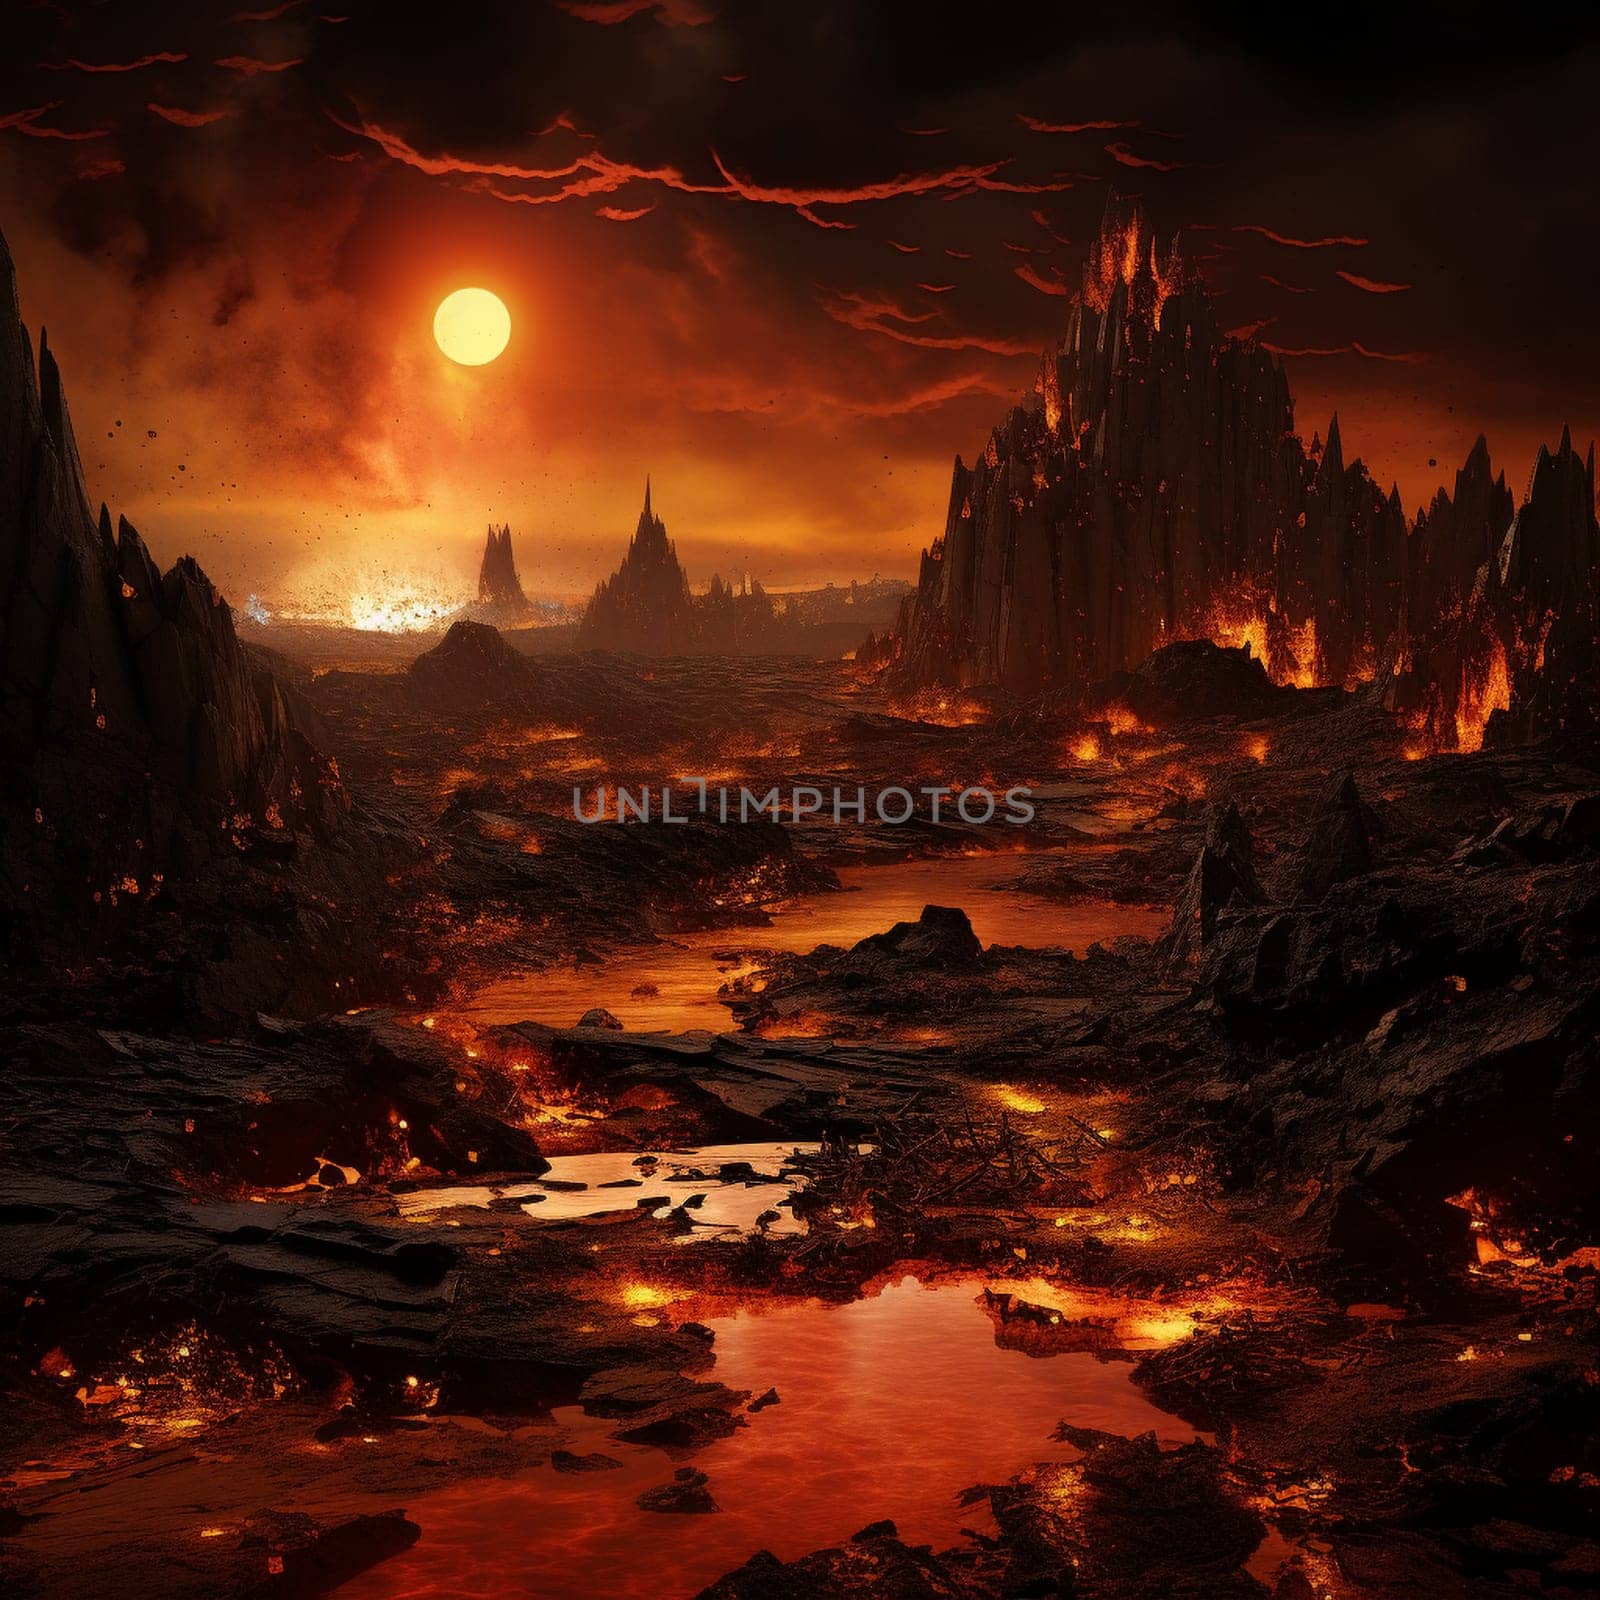 Immerse yourself in this mesmerizing and powerful image of a surreal landscape, depicting the aftermath of a volcanic eruption. The ground is split open, with molten lava and ash erupting into the air, creating a scene of destruction and raw power. The entire area is bathed in a fiery glow, casting an eerie light on the surroundings. To add a sense of otherworldliness, the image incorporates elements of mysticism and fantasy, such as floating islands and ethereal creatures. The vibrant and highly detailed art style, with a touch of impressionism, adds a dreamlike quality to the scene. This artwork captures the eternal and relentless power of the Earth, evoking both awe and fear.